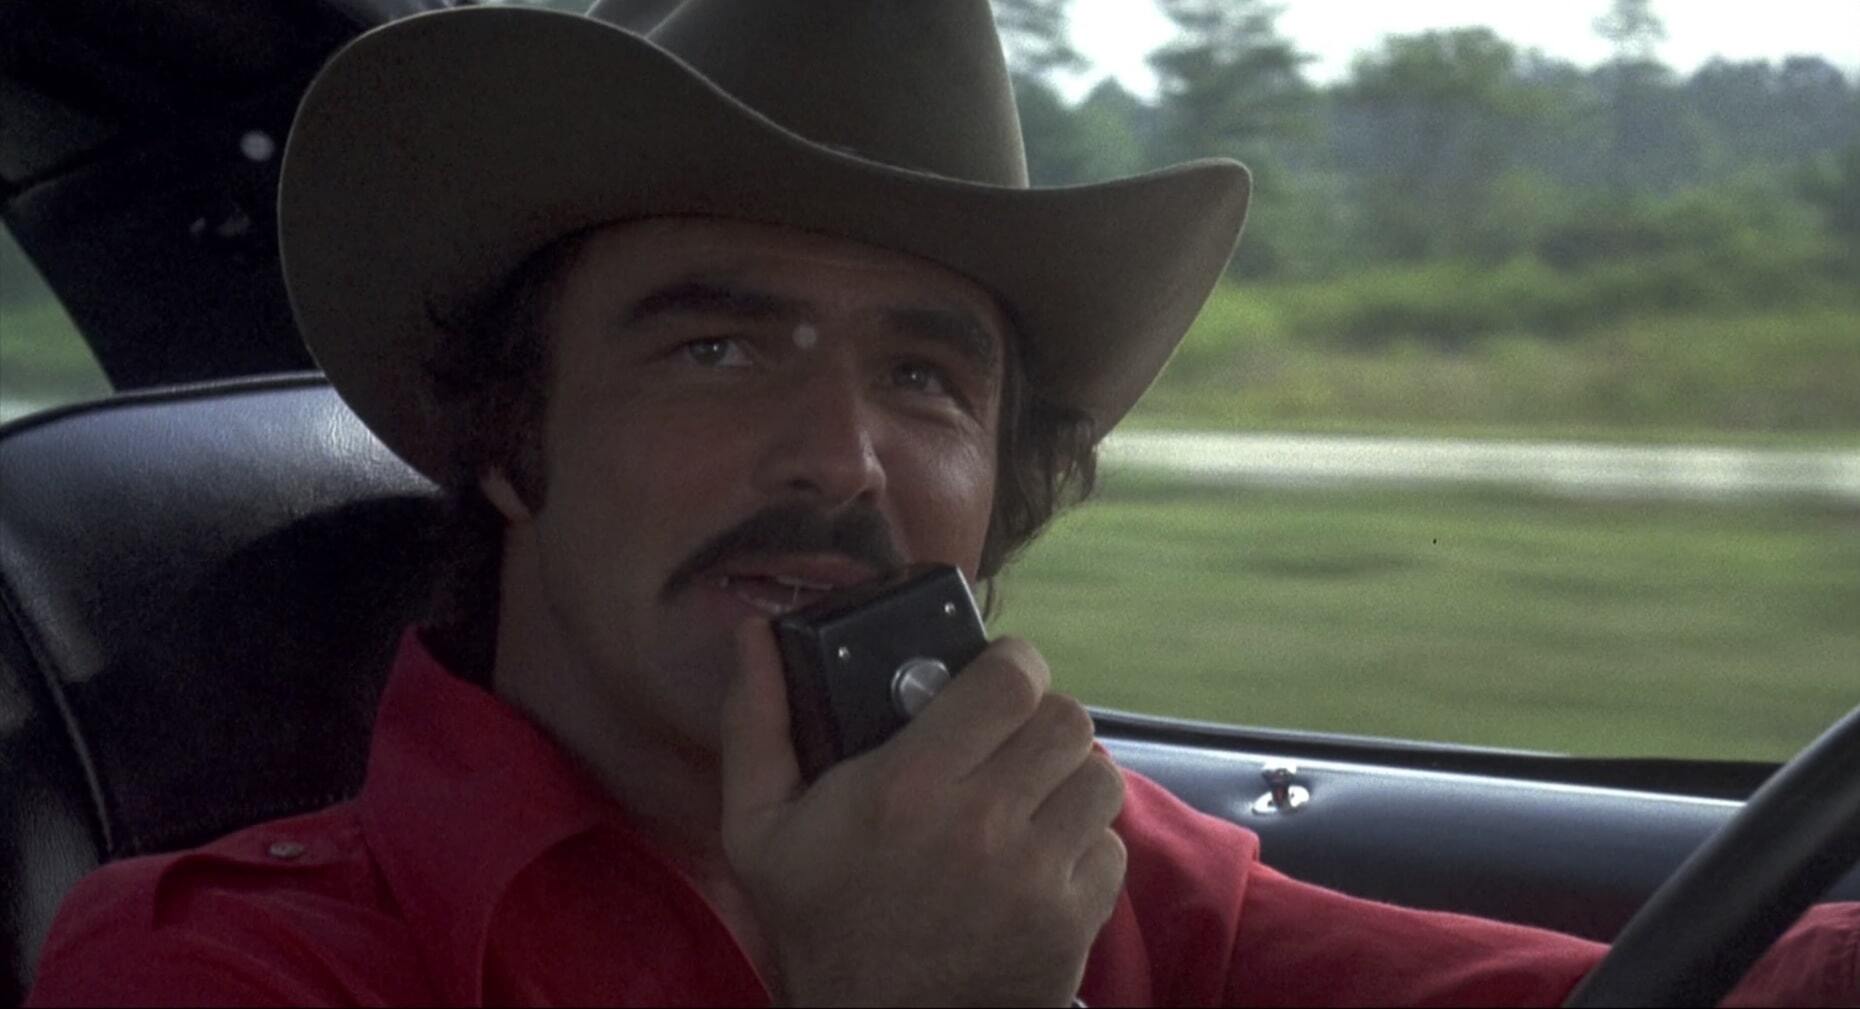 <p>Burt Reynolds’ directorial debut was everything anyone could have hoped for, with his hilarious and exciting film about a bootlegger and runaway bride trying to smuggle 400 cases of beer from Texas to Atlanta. It was a <a href="https://www.indiewire.com/2020/05/star-wars-opening-weekend-43-years-ago-1202233262/">massive hit</a>, with only <a href="https://www.imdb.com/title/tt0076759/"><em>Star Wars</em></a> outperforming this <a href="https://www.imdb.com/title/tt0076729/">iconic 1977 film</a> at the box office. The on-screen chemistry would even blossom into a <a href="https://www.countryliving.com/life/entertainment/a30188809/sally-field-burt-reynolds-relationship/">real relationship between Reynolds and co-star Sally Field</a>.</p>